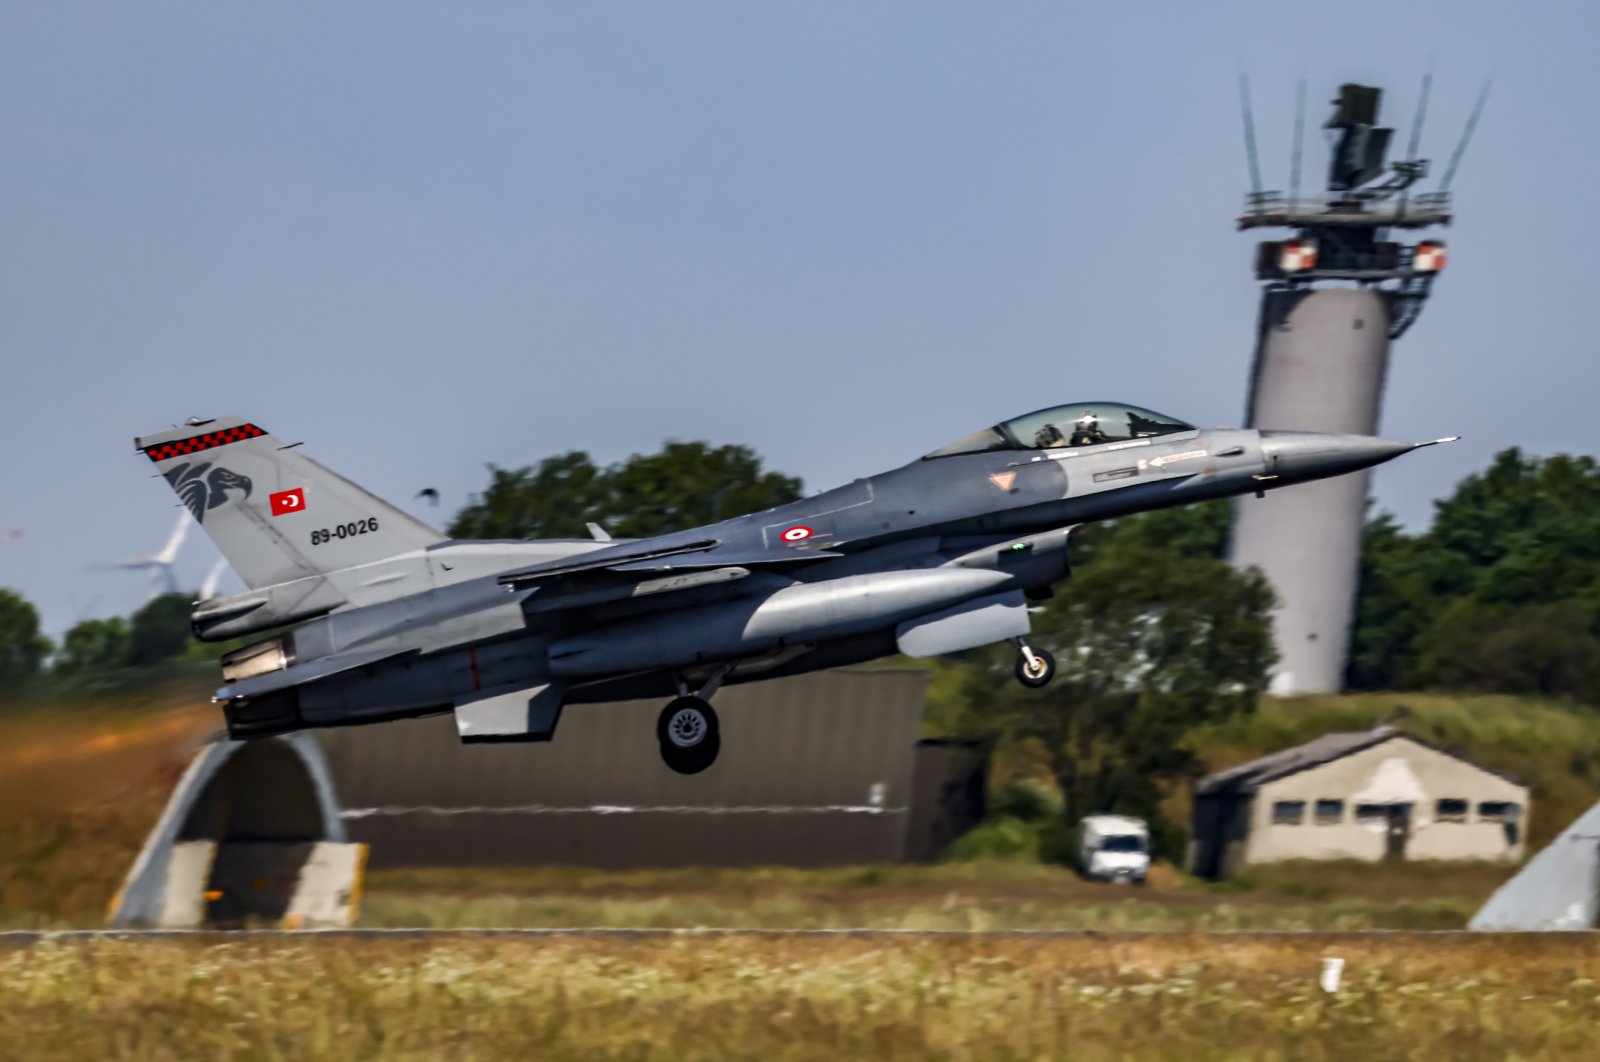 A Turkish Air Force F-16 takes off from the base of the 51 Tactical Air Wing Immelmann, during the NATO Air Defender 2023 exercise in Jagel, Germany, June 9, 2023. (EPA Photo)